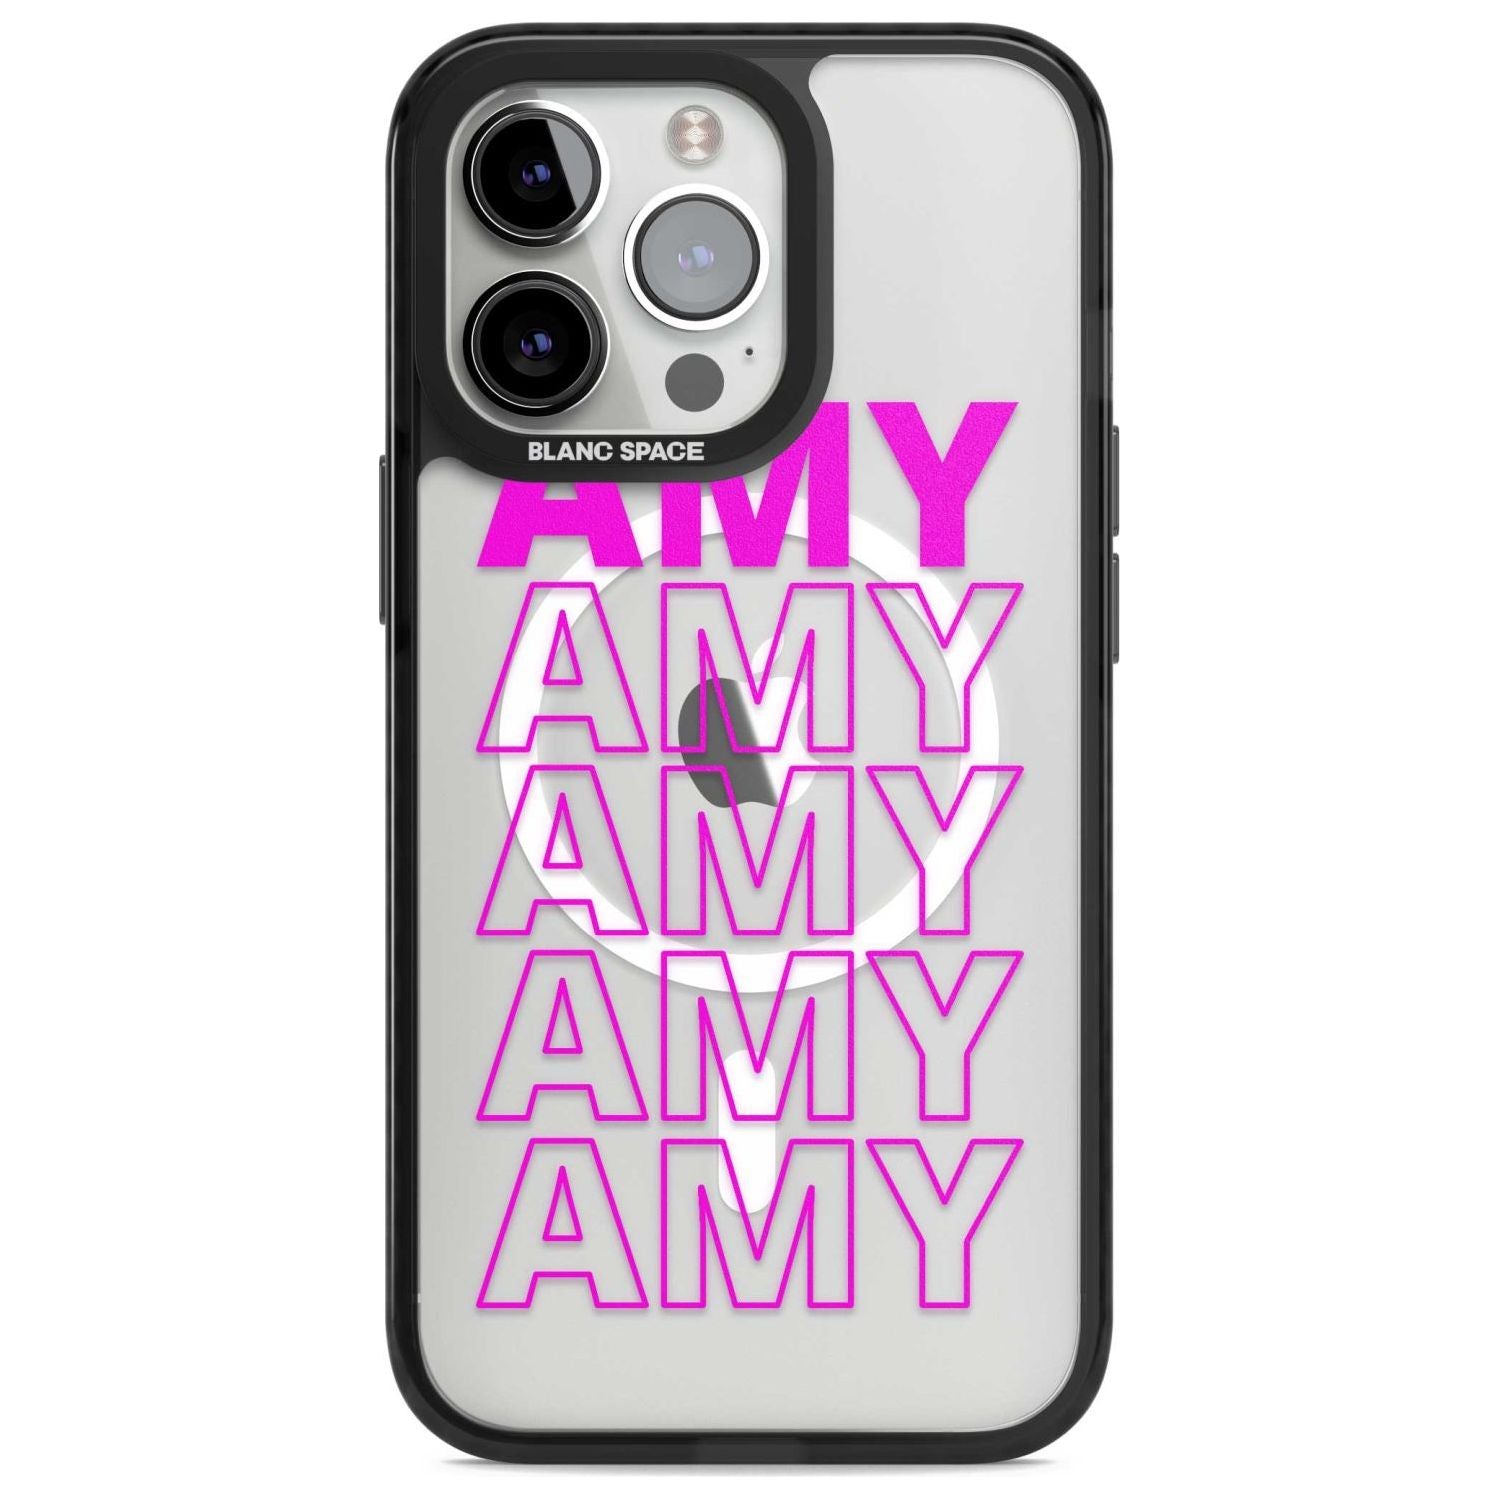 Personalised Clear Text  5D Custom Phone Case iPhone 15 Pro Max / Magsafe Black Impact Case,iPhone 15 Pro / Magsafe Black Impact Case,iPhone 14 Pro Max / Magsafe Black Impact Case,iPhone 14 Pro / Magsafe Black Impact Case,iPhone 13 Pro / Magsafe Black Impact Case Blanc Space